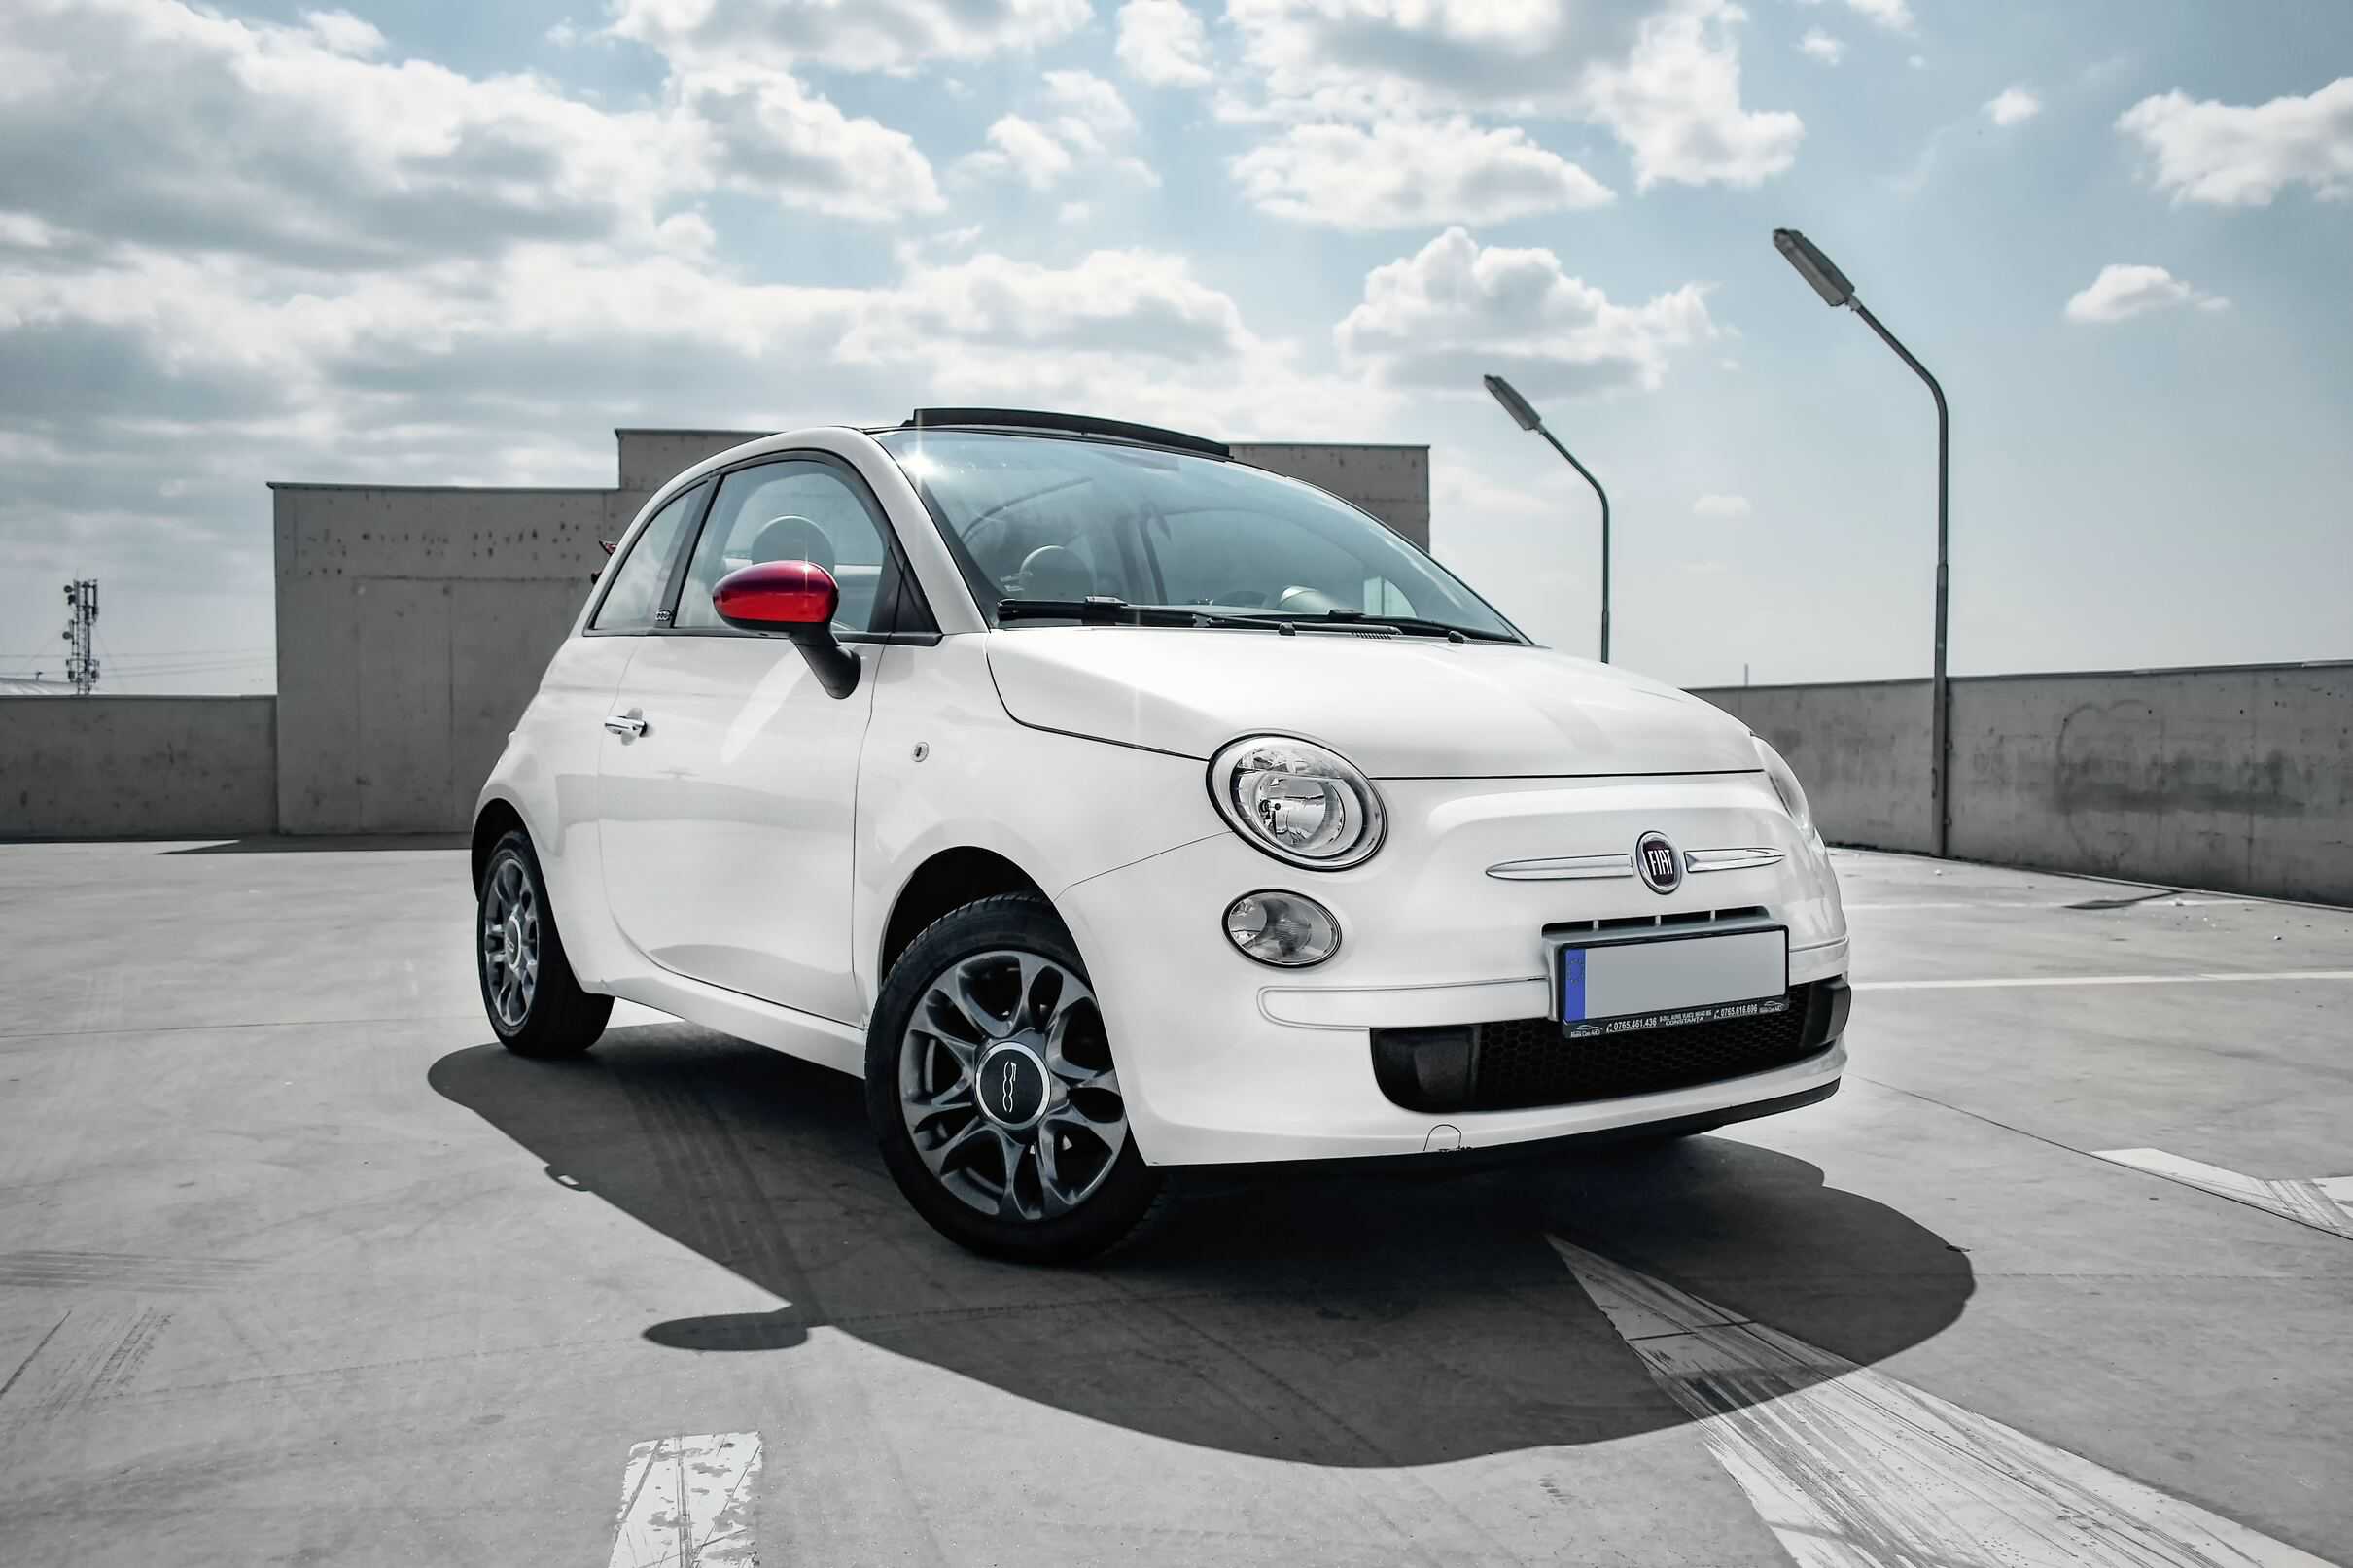 White Fiat 500 - A stylish and compact white Fiat 500 car